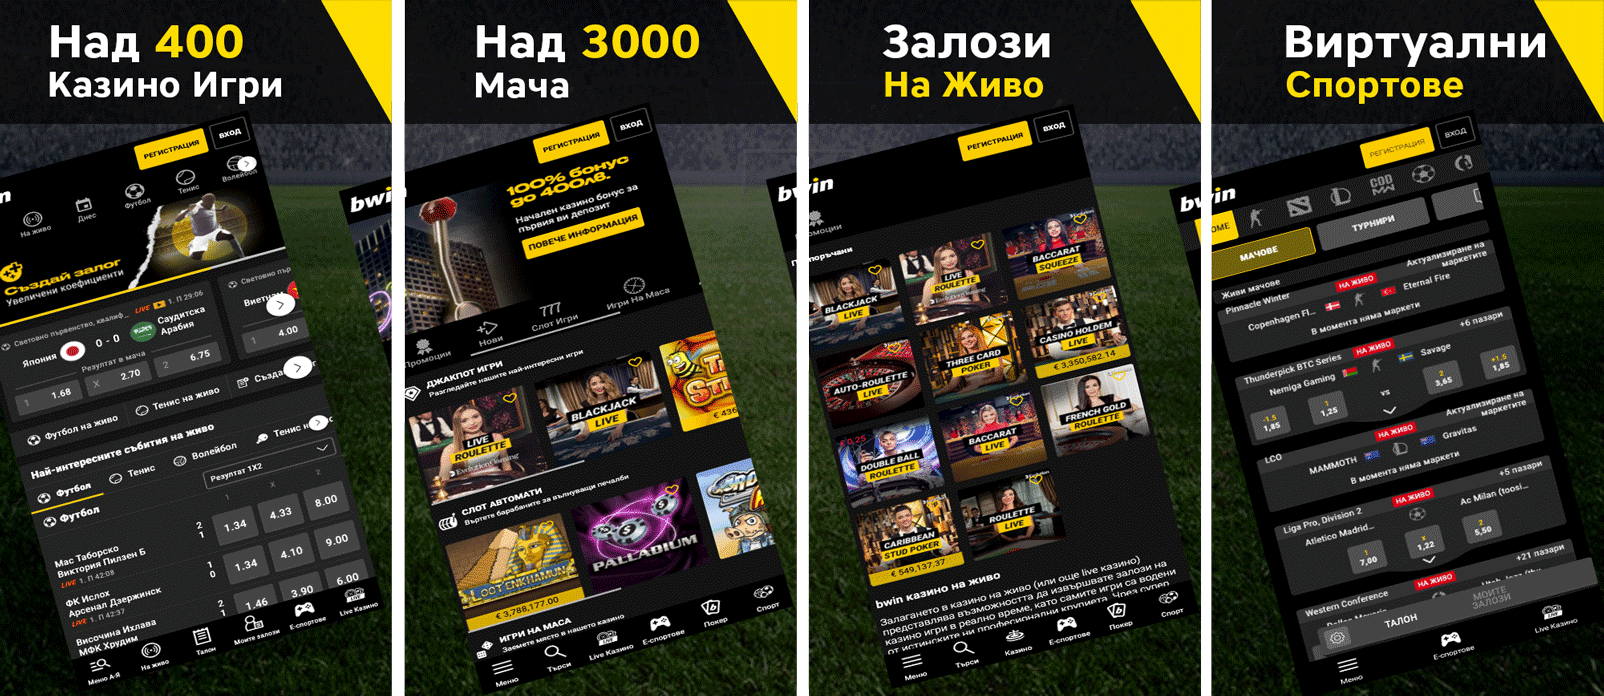 bwin-mobile